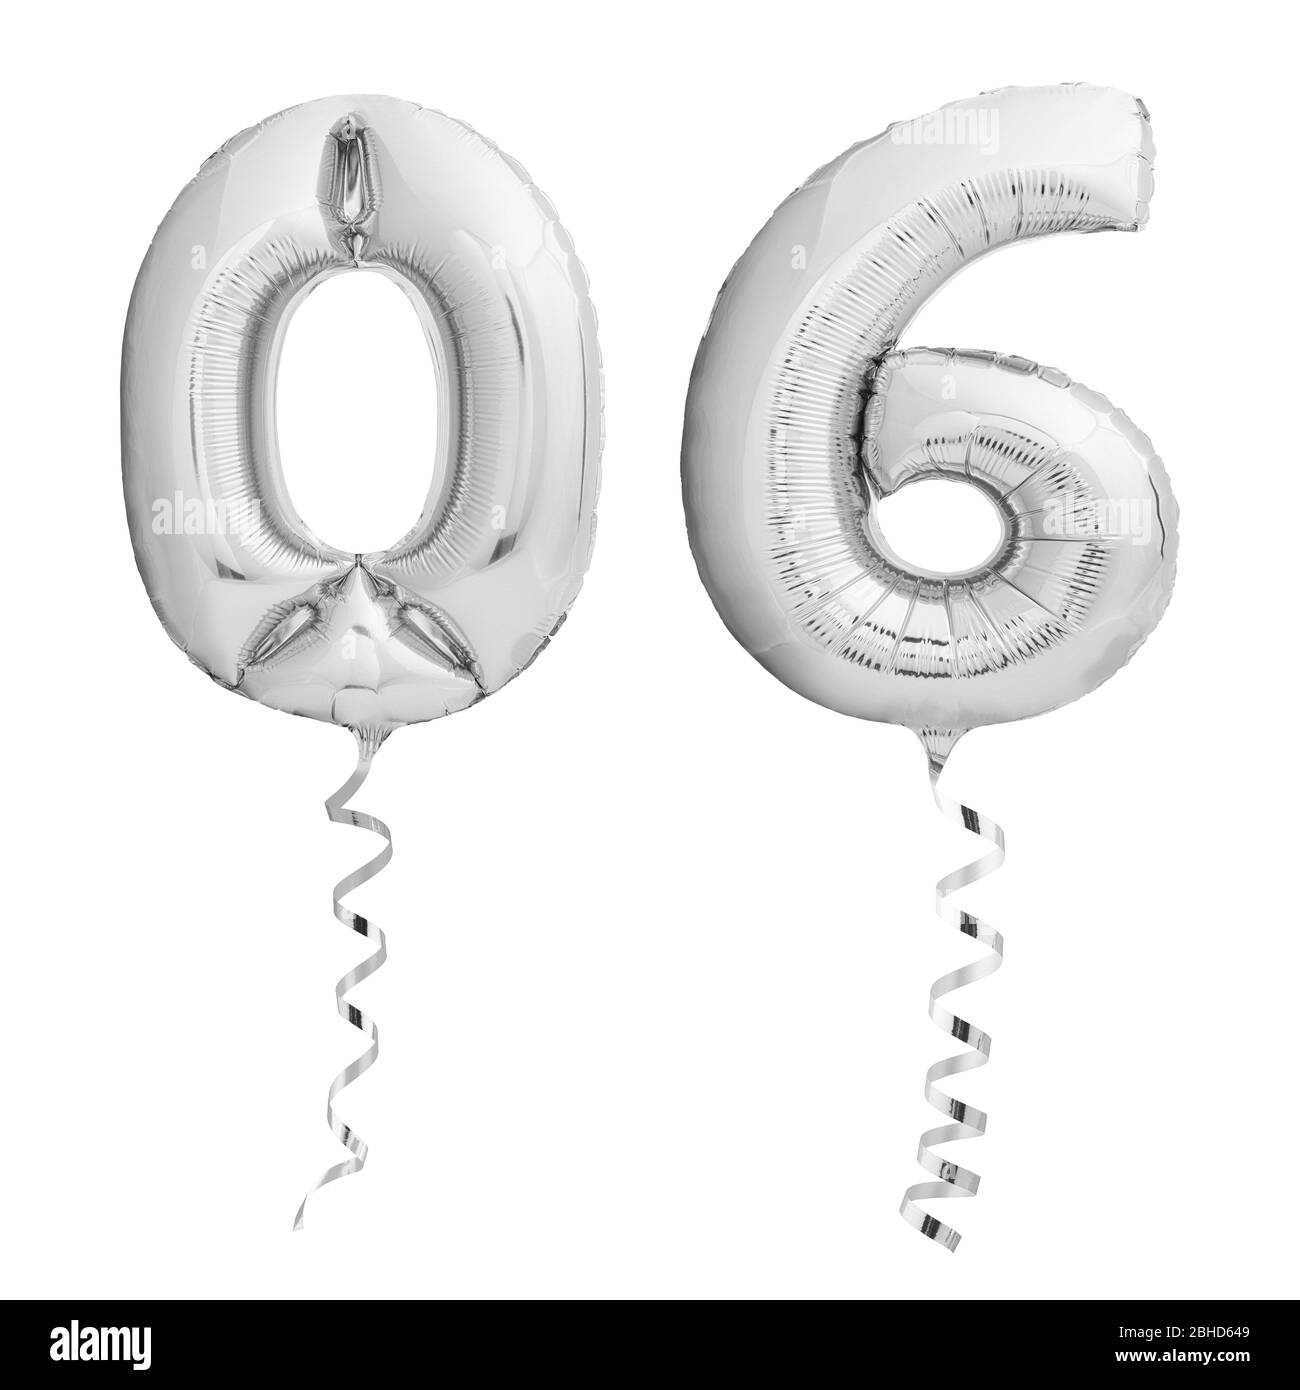 Silver number 06 made of inflatable party balloons with silver ribbons isolated on white background Stock Photo